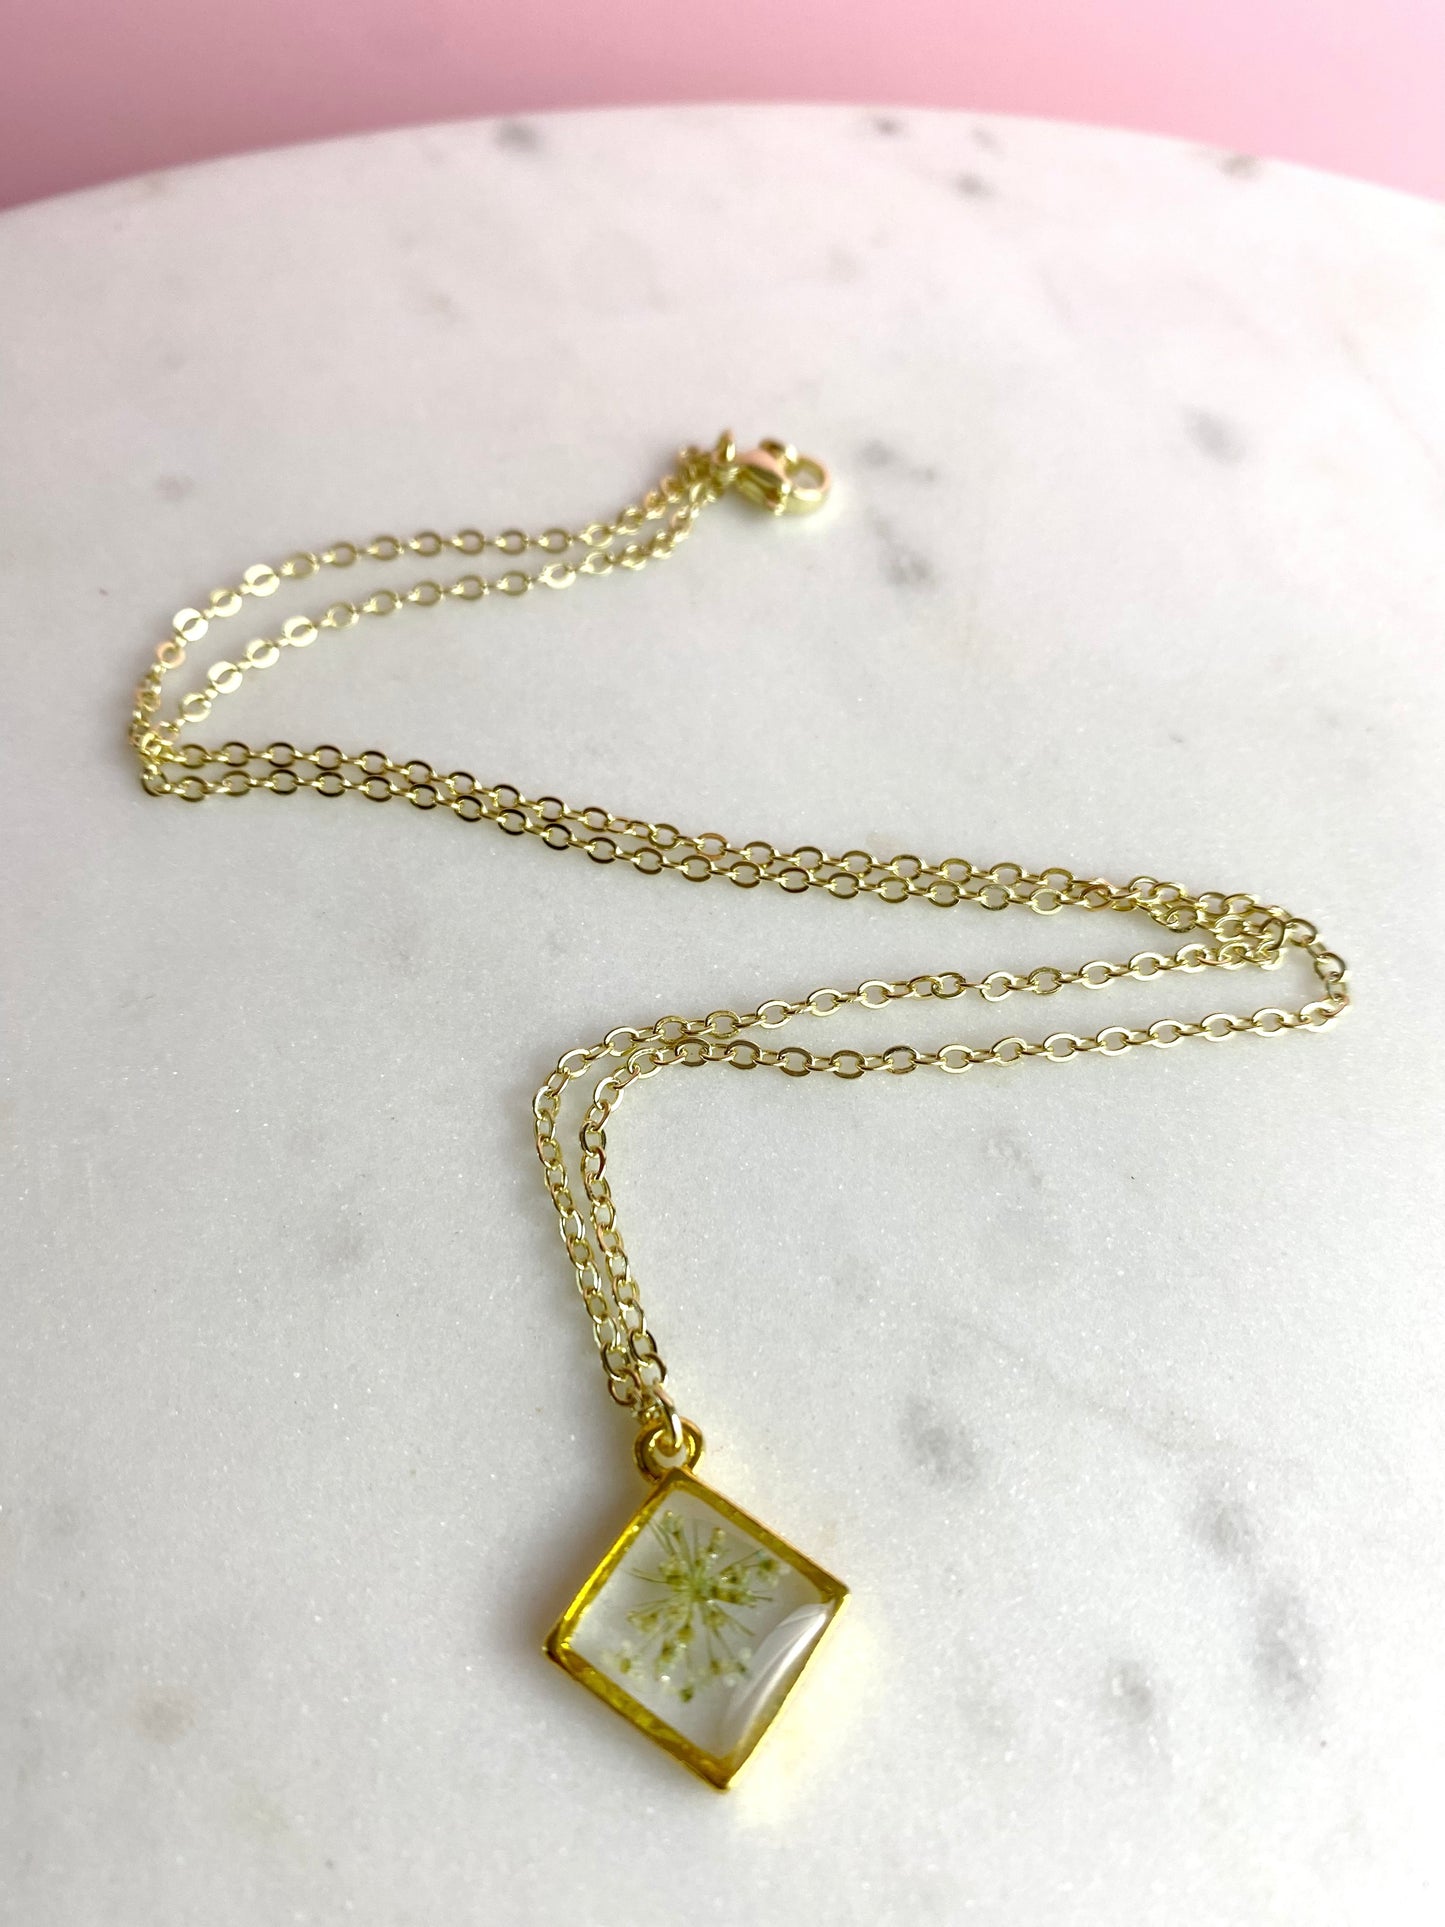 Pressed Flower Necklace | Queen Anne's Lace Diamond | Handmade Jewelry